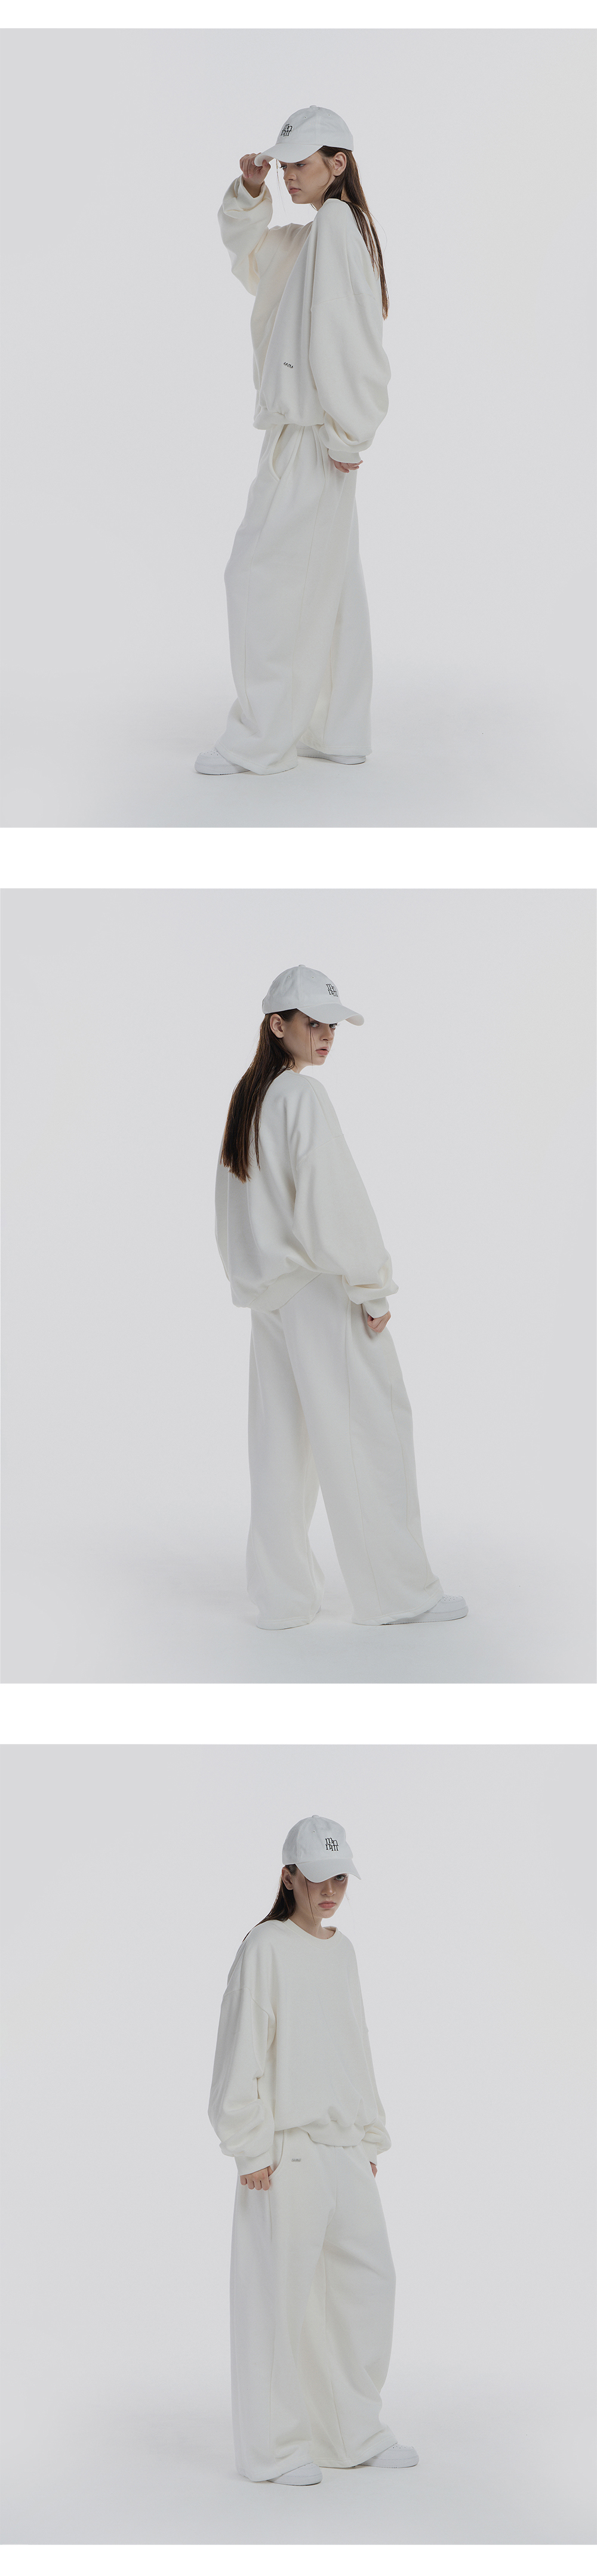 long sleeved tee white color image-S1L8